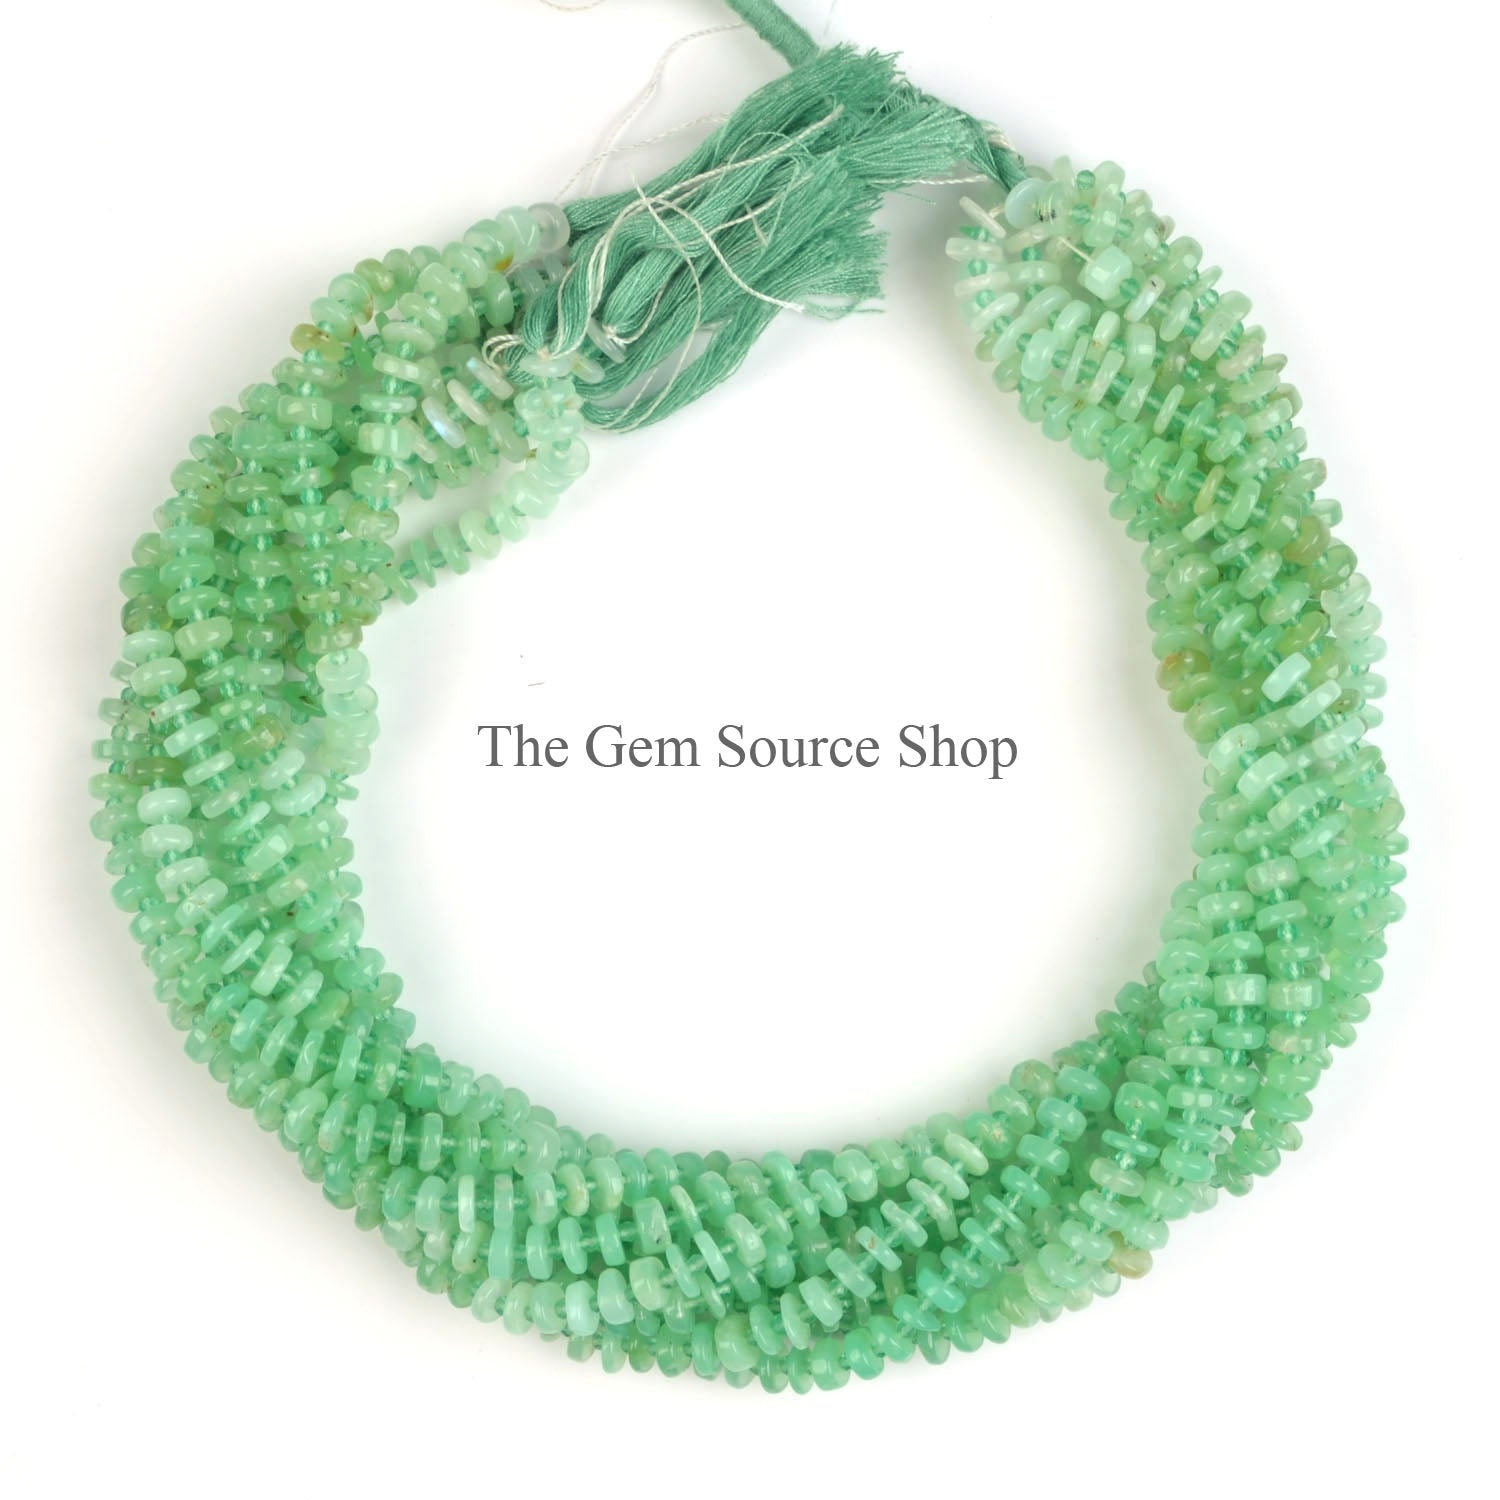 Chrysoprase Beads, Smooth Tyre Shape Beads, Plain Tyre Beads, Chrysoprase Gemstone Beads